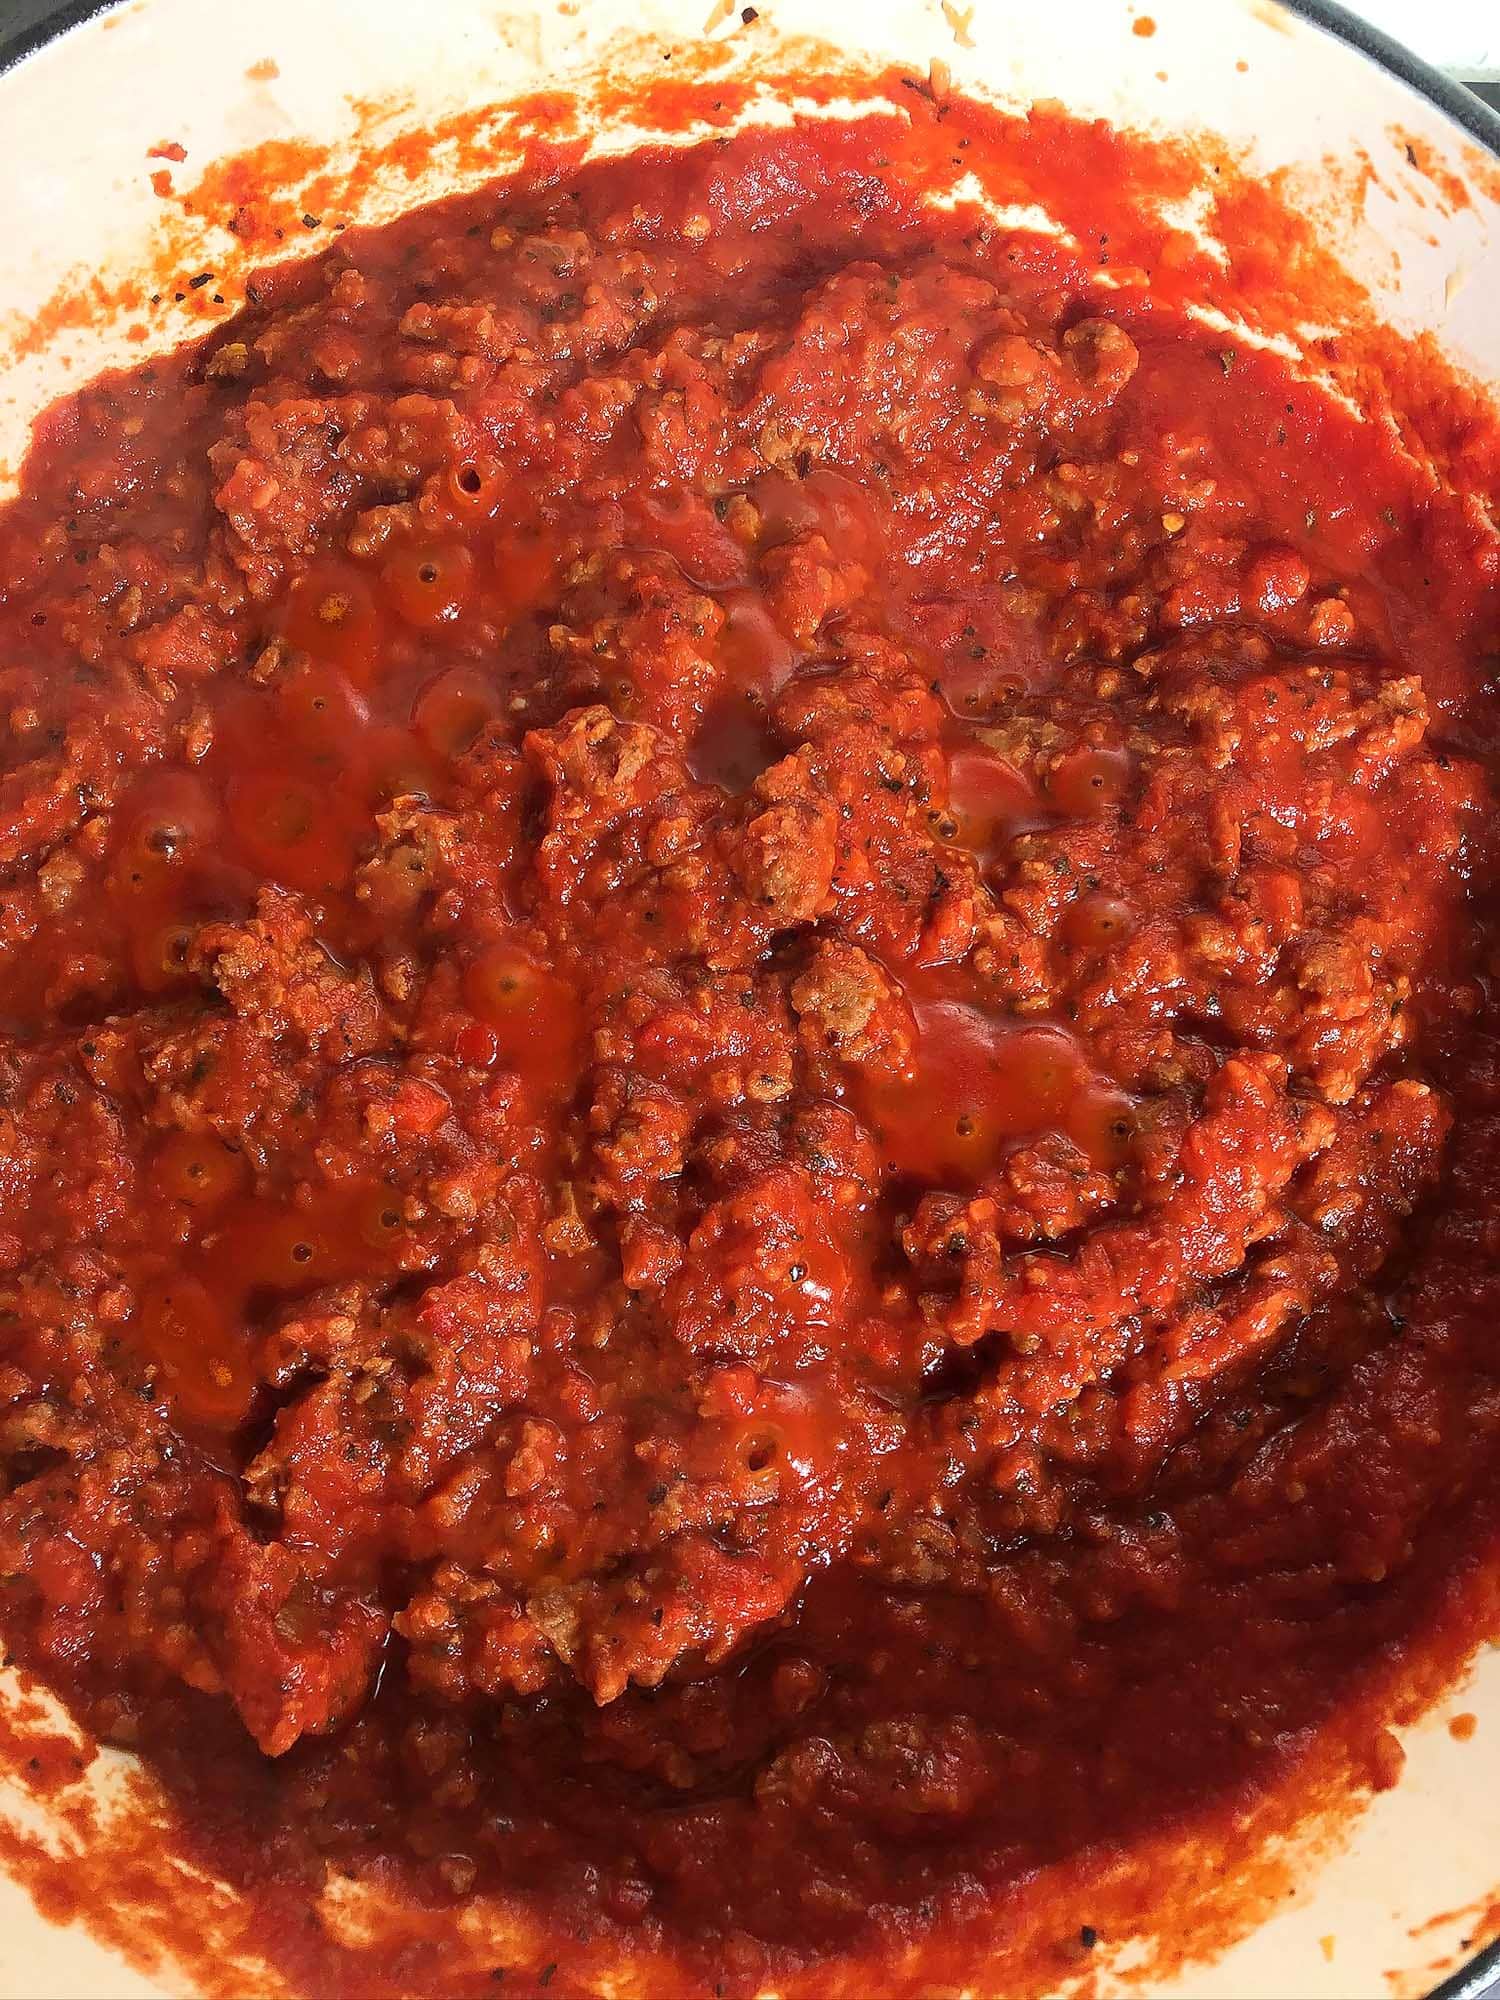 Top-down view of Beyond Meat Spaghetti Sauce, simmering on stove